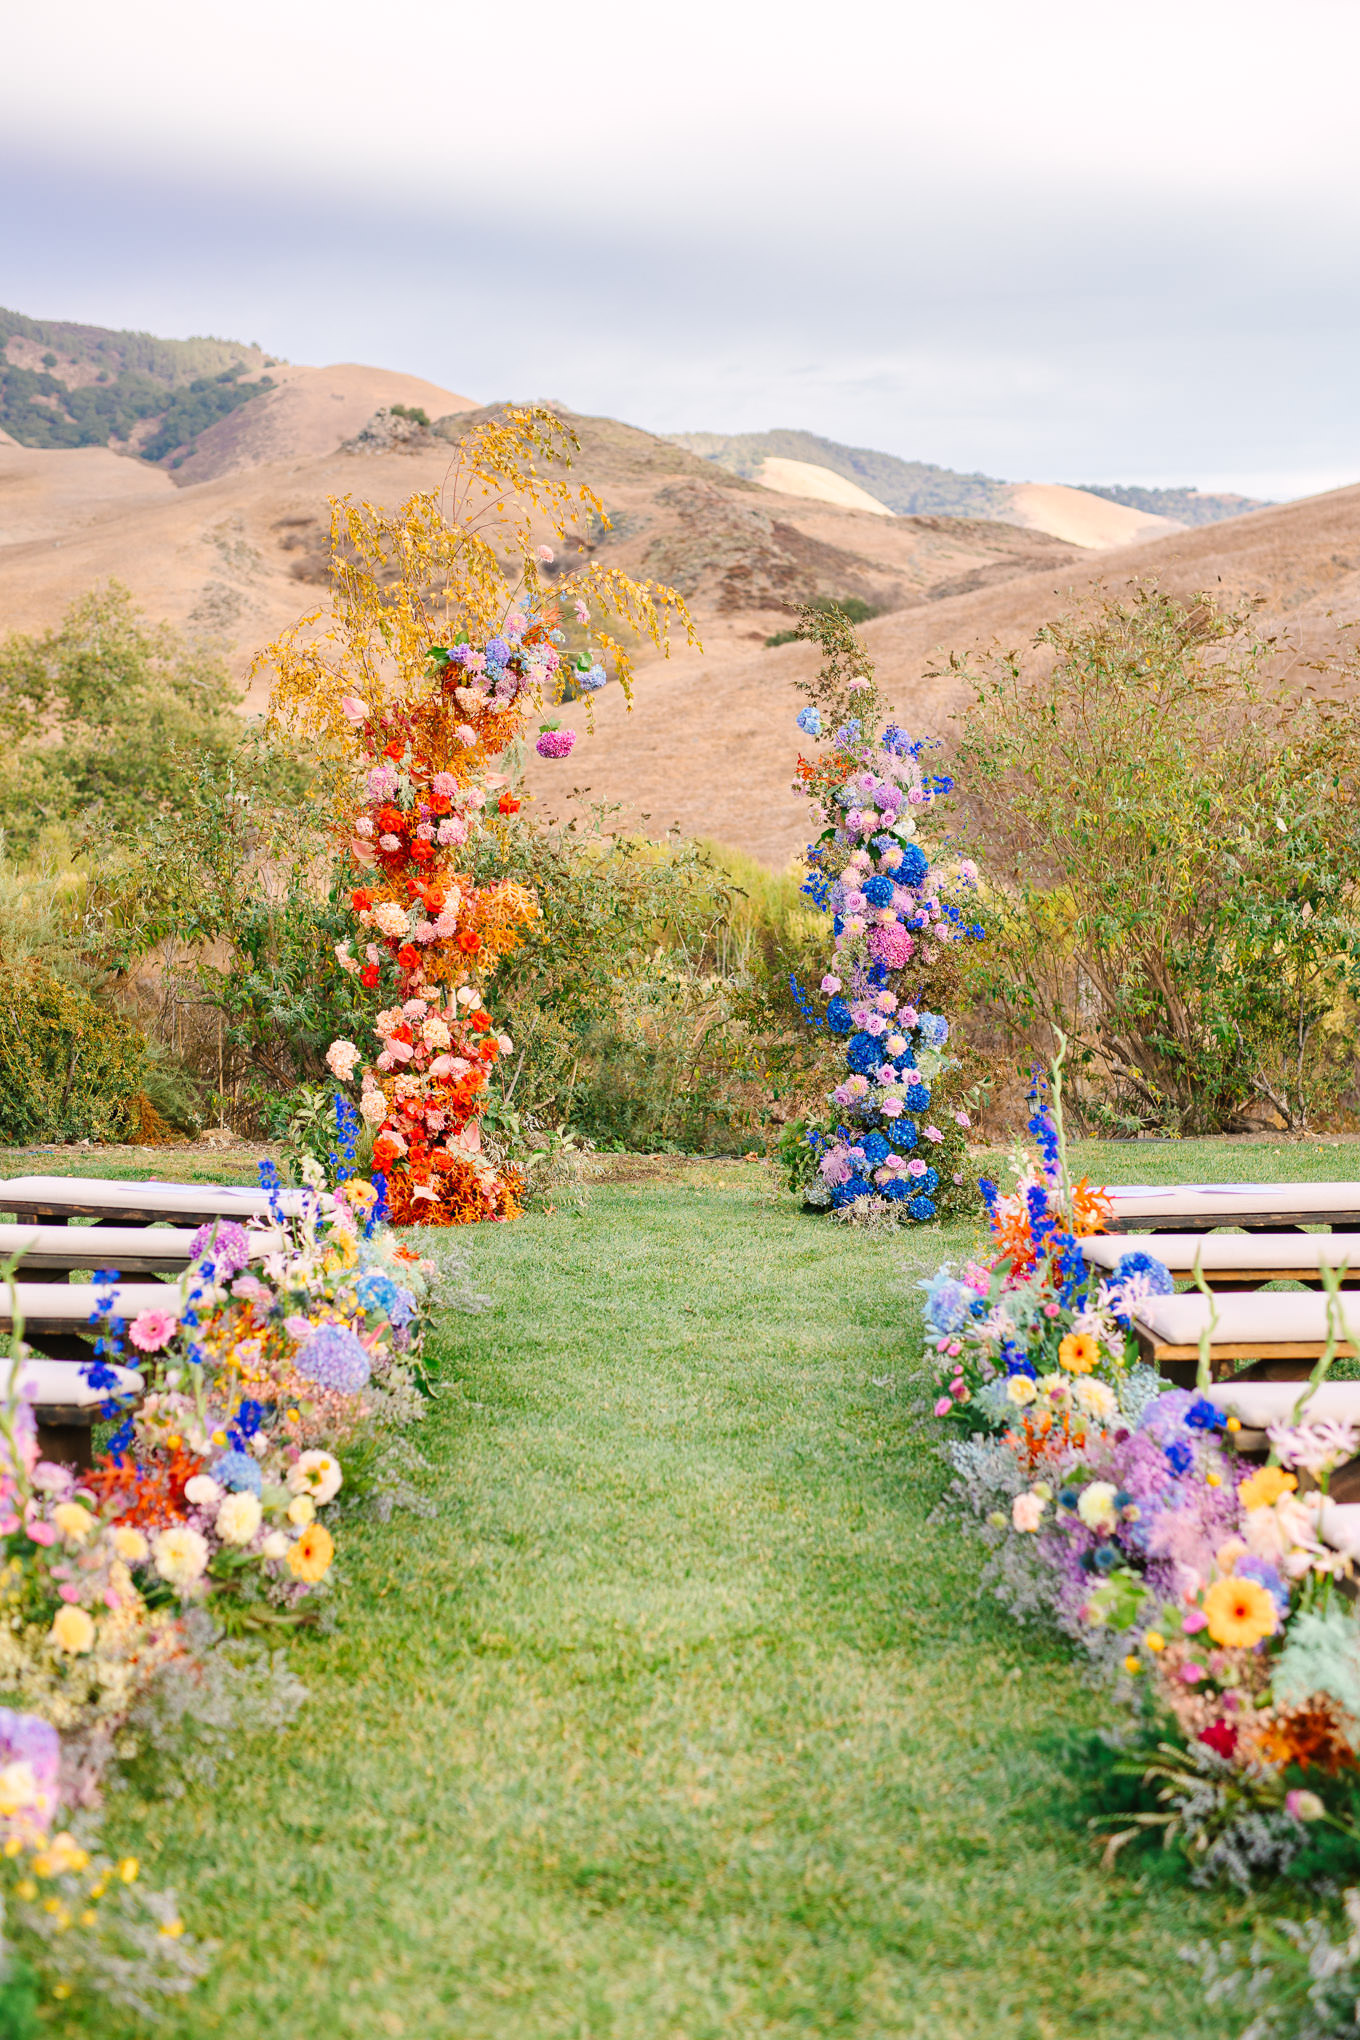 Floral wedding ceremony installation | Colorful and quirky wedding at Higuera Ranch in San Luis Obispo | #sanluisobispowedding #californiawedding #higueraranch #madonnainn   
Source: Mary Costa Photography | Los Angeles
